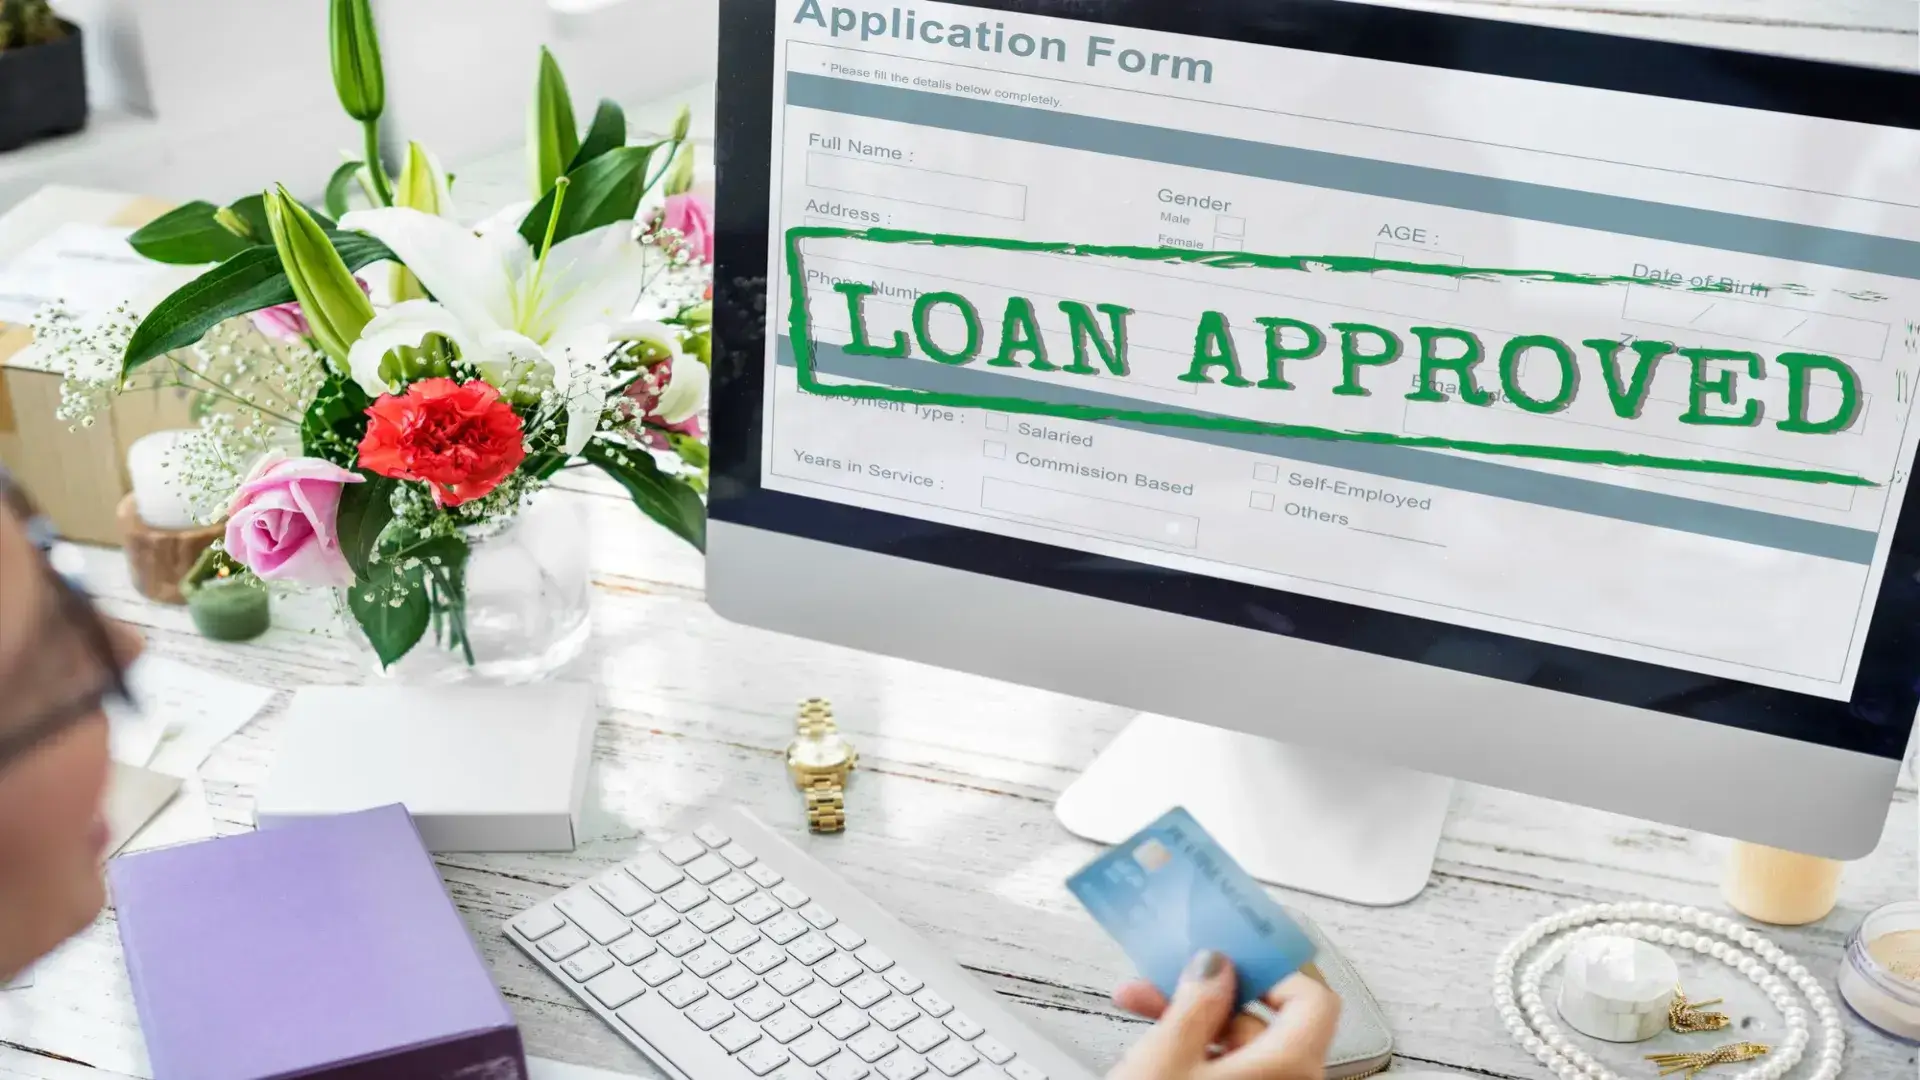 loan approved application form concept%20(1)